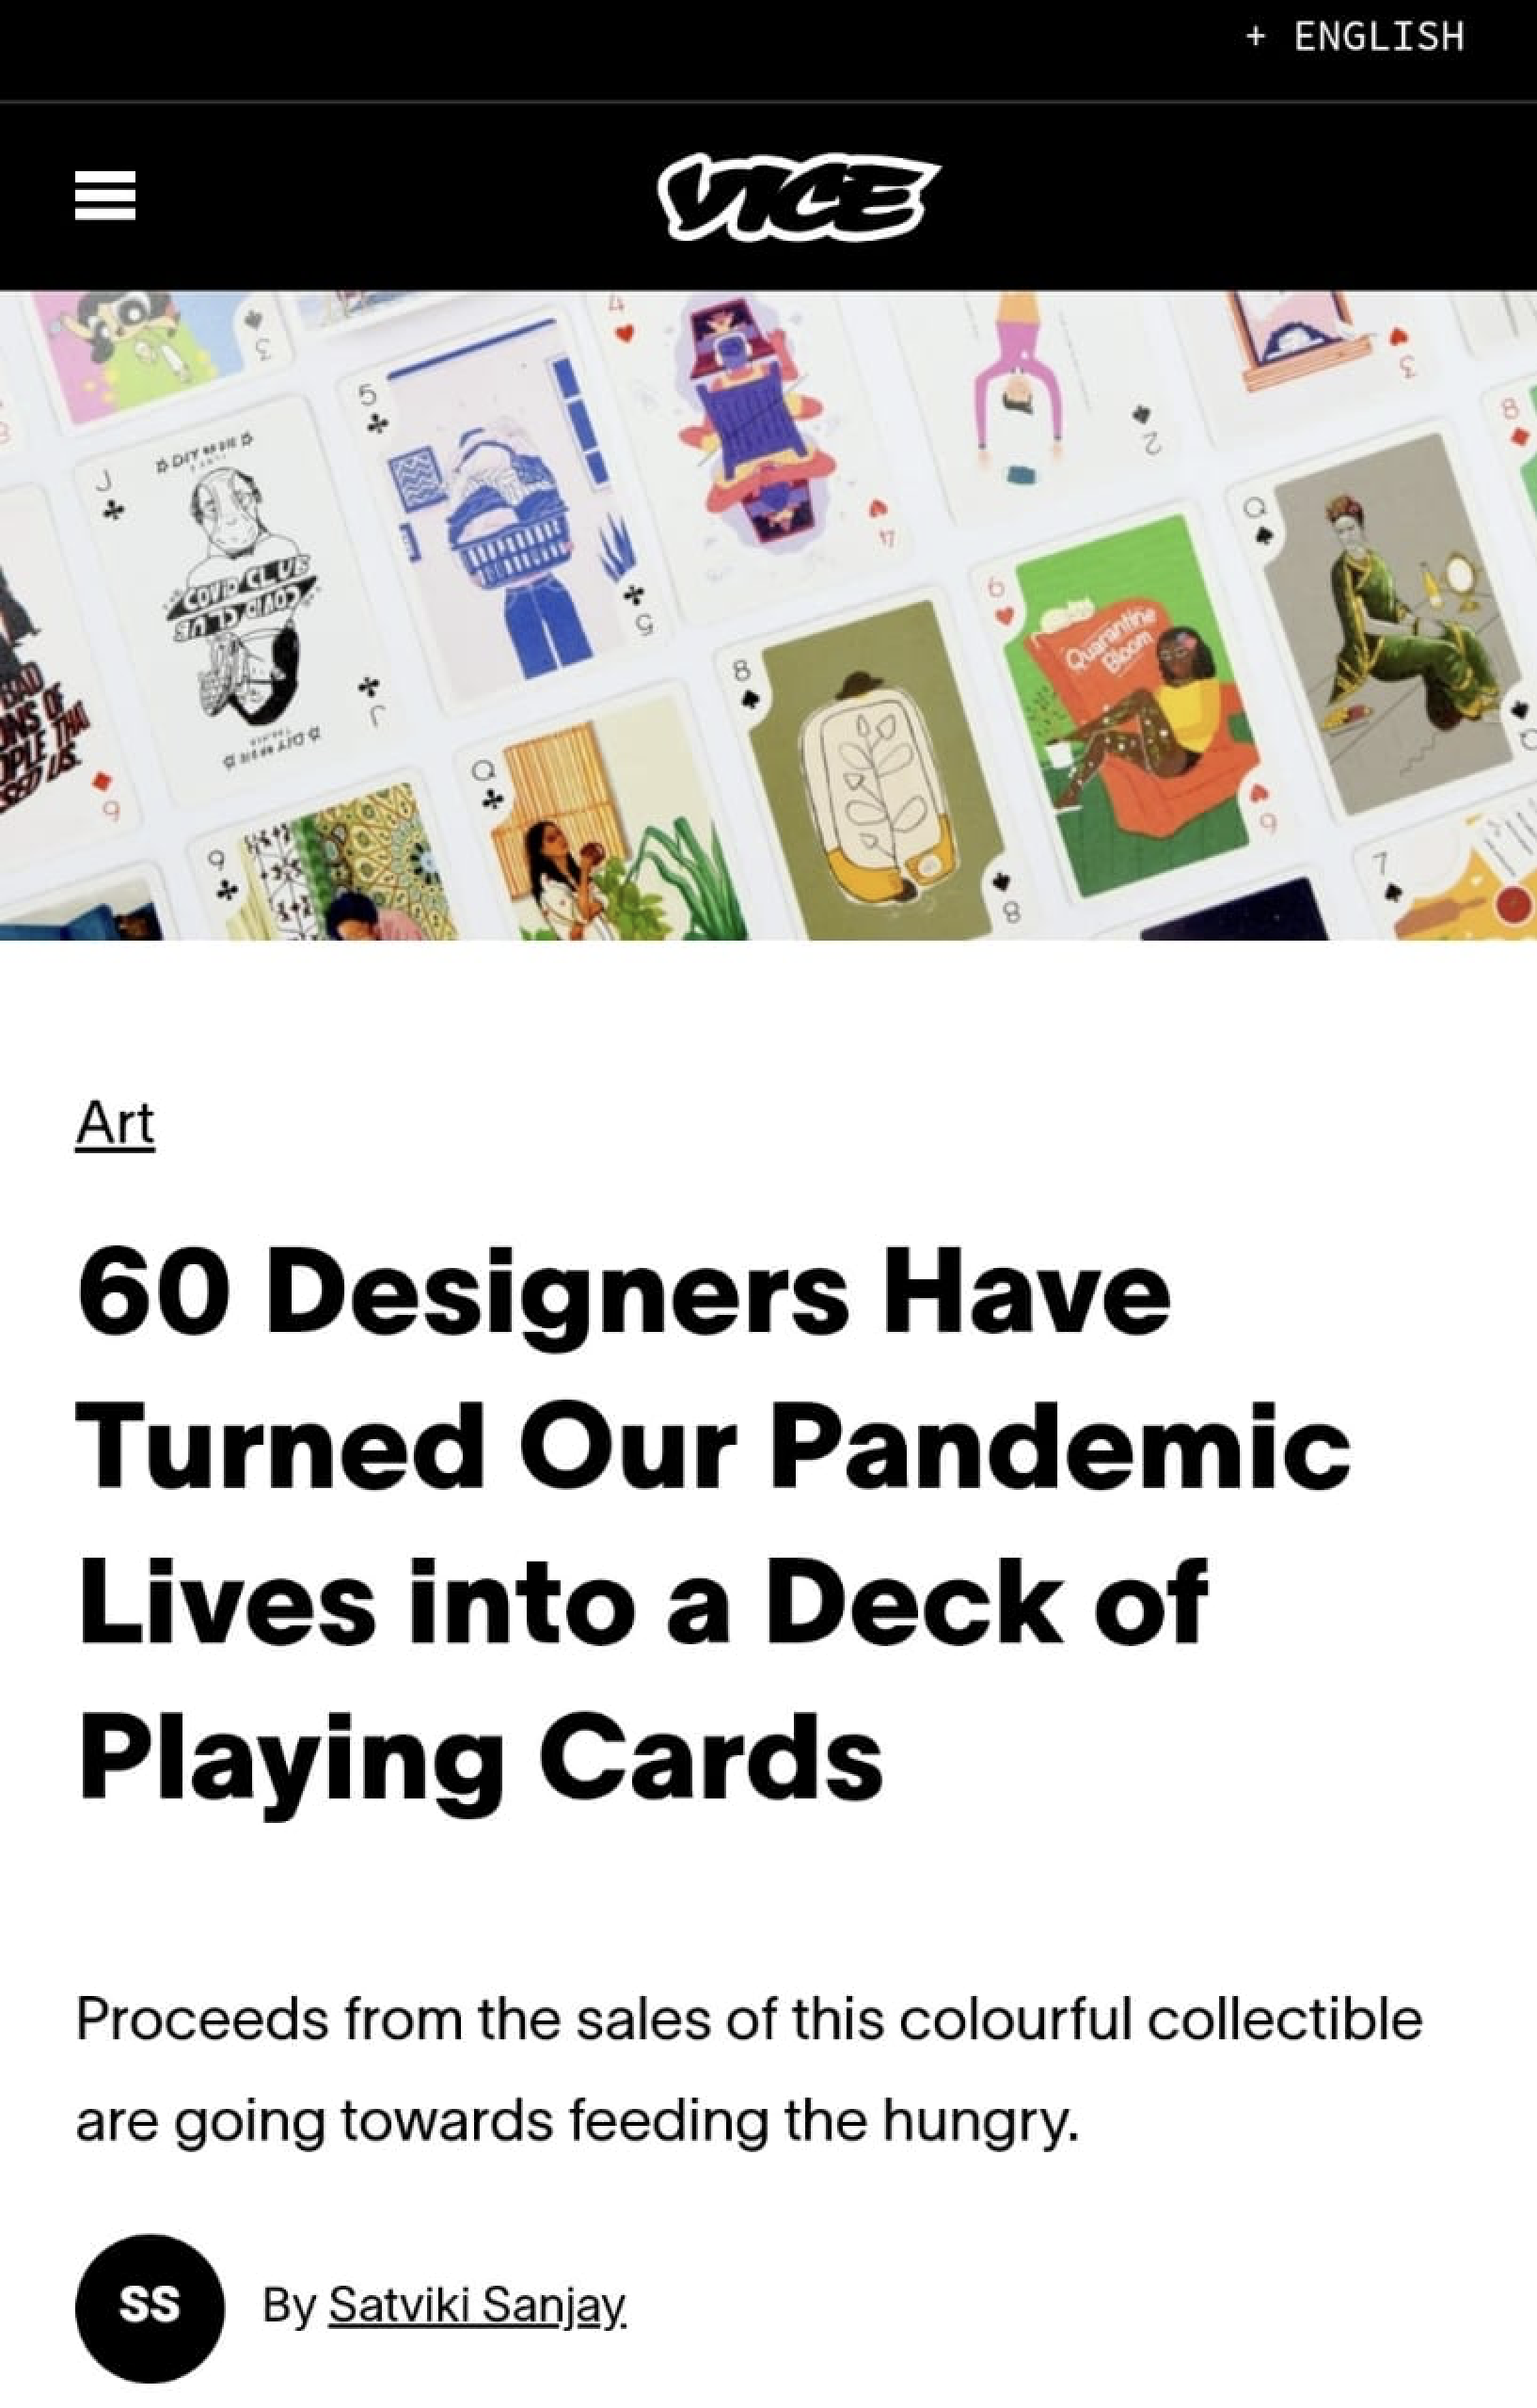 Cards for a Cause featured in Vice